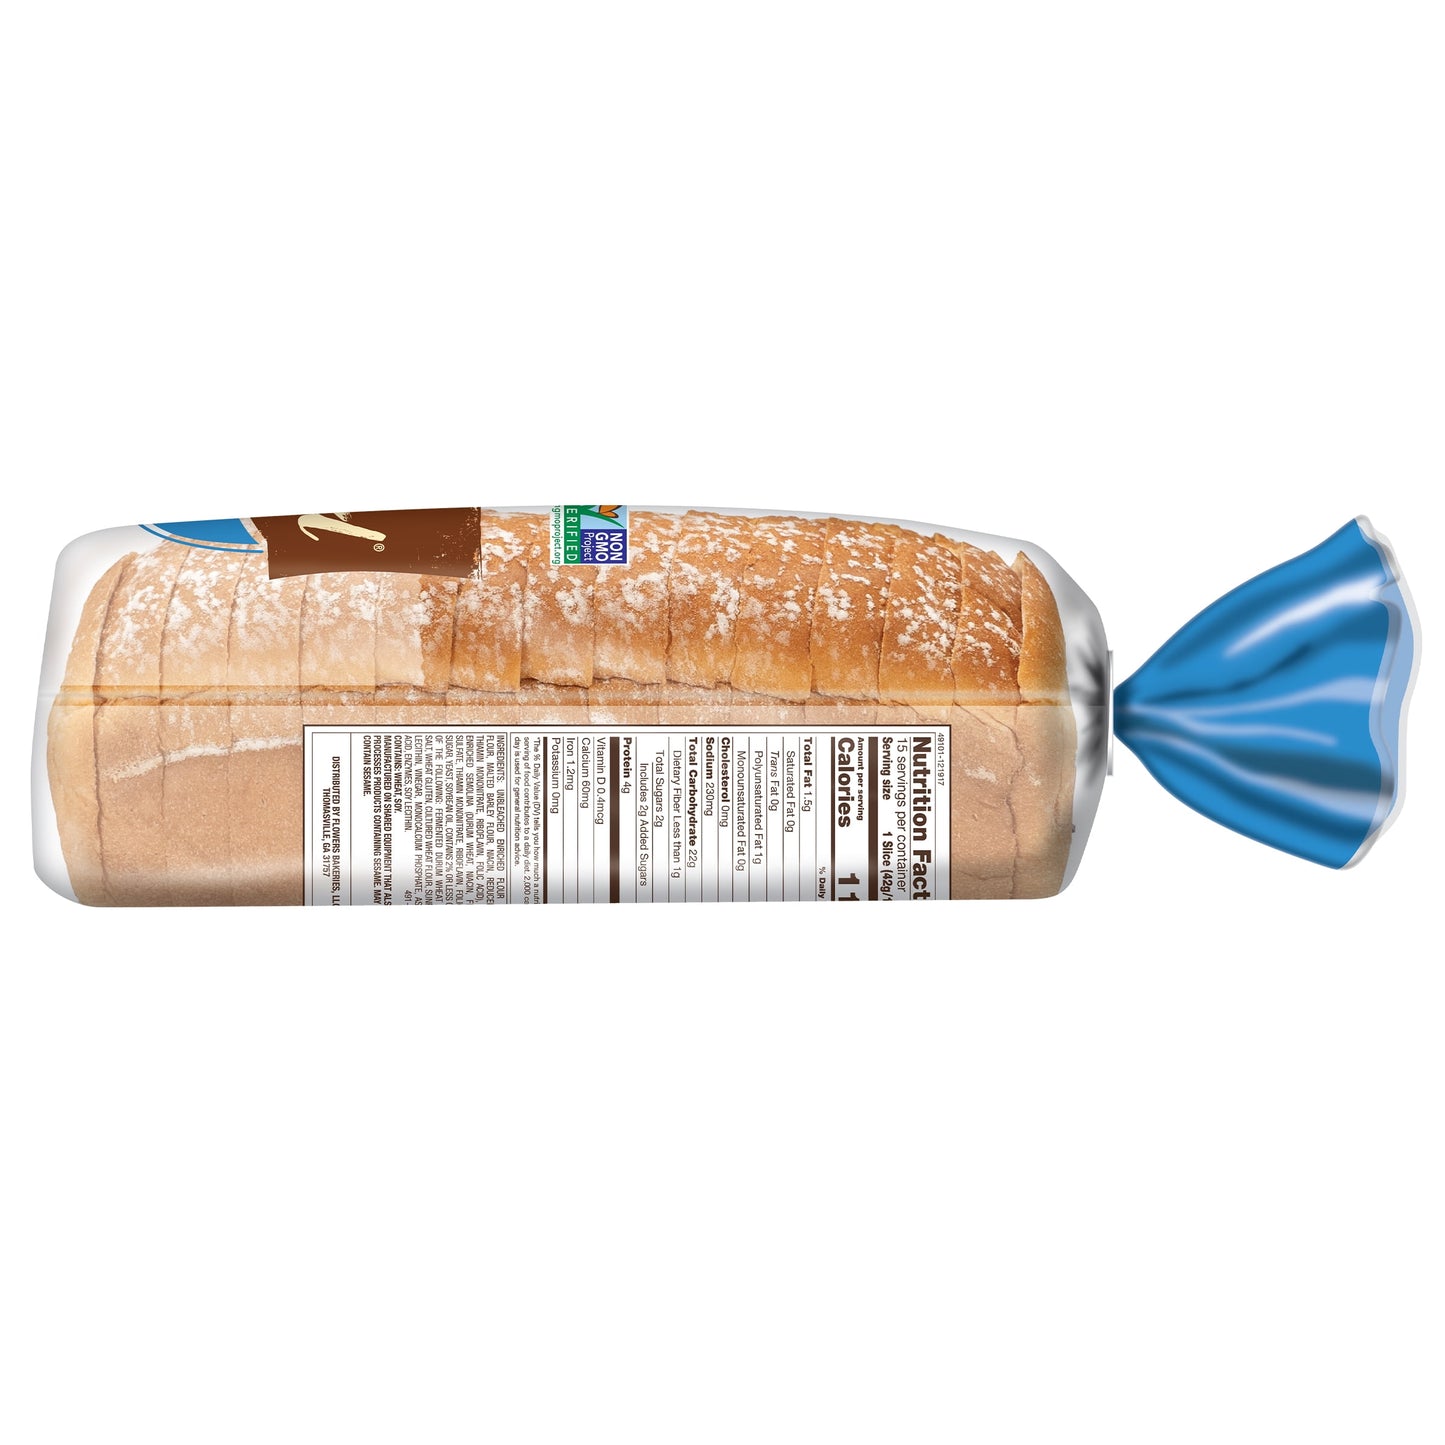 Nature's Own Perfectly Crafted White Bread, Thick-Sliced Loaf, 22 oz